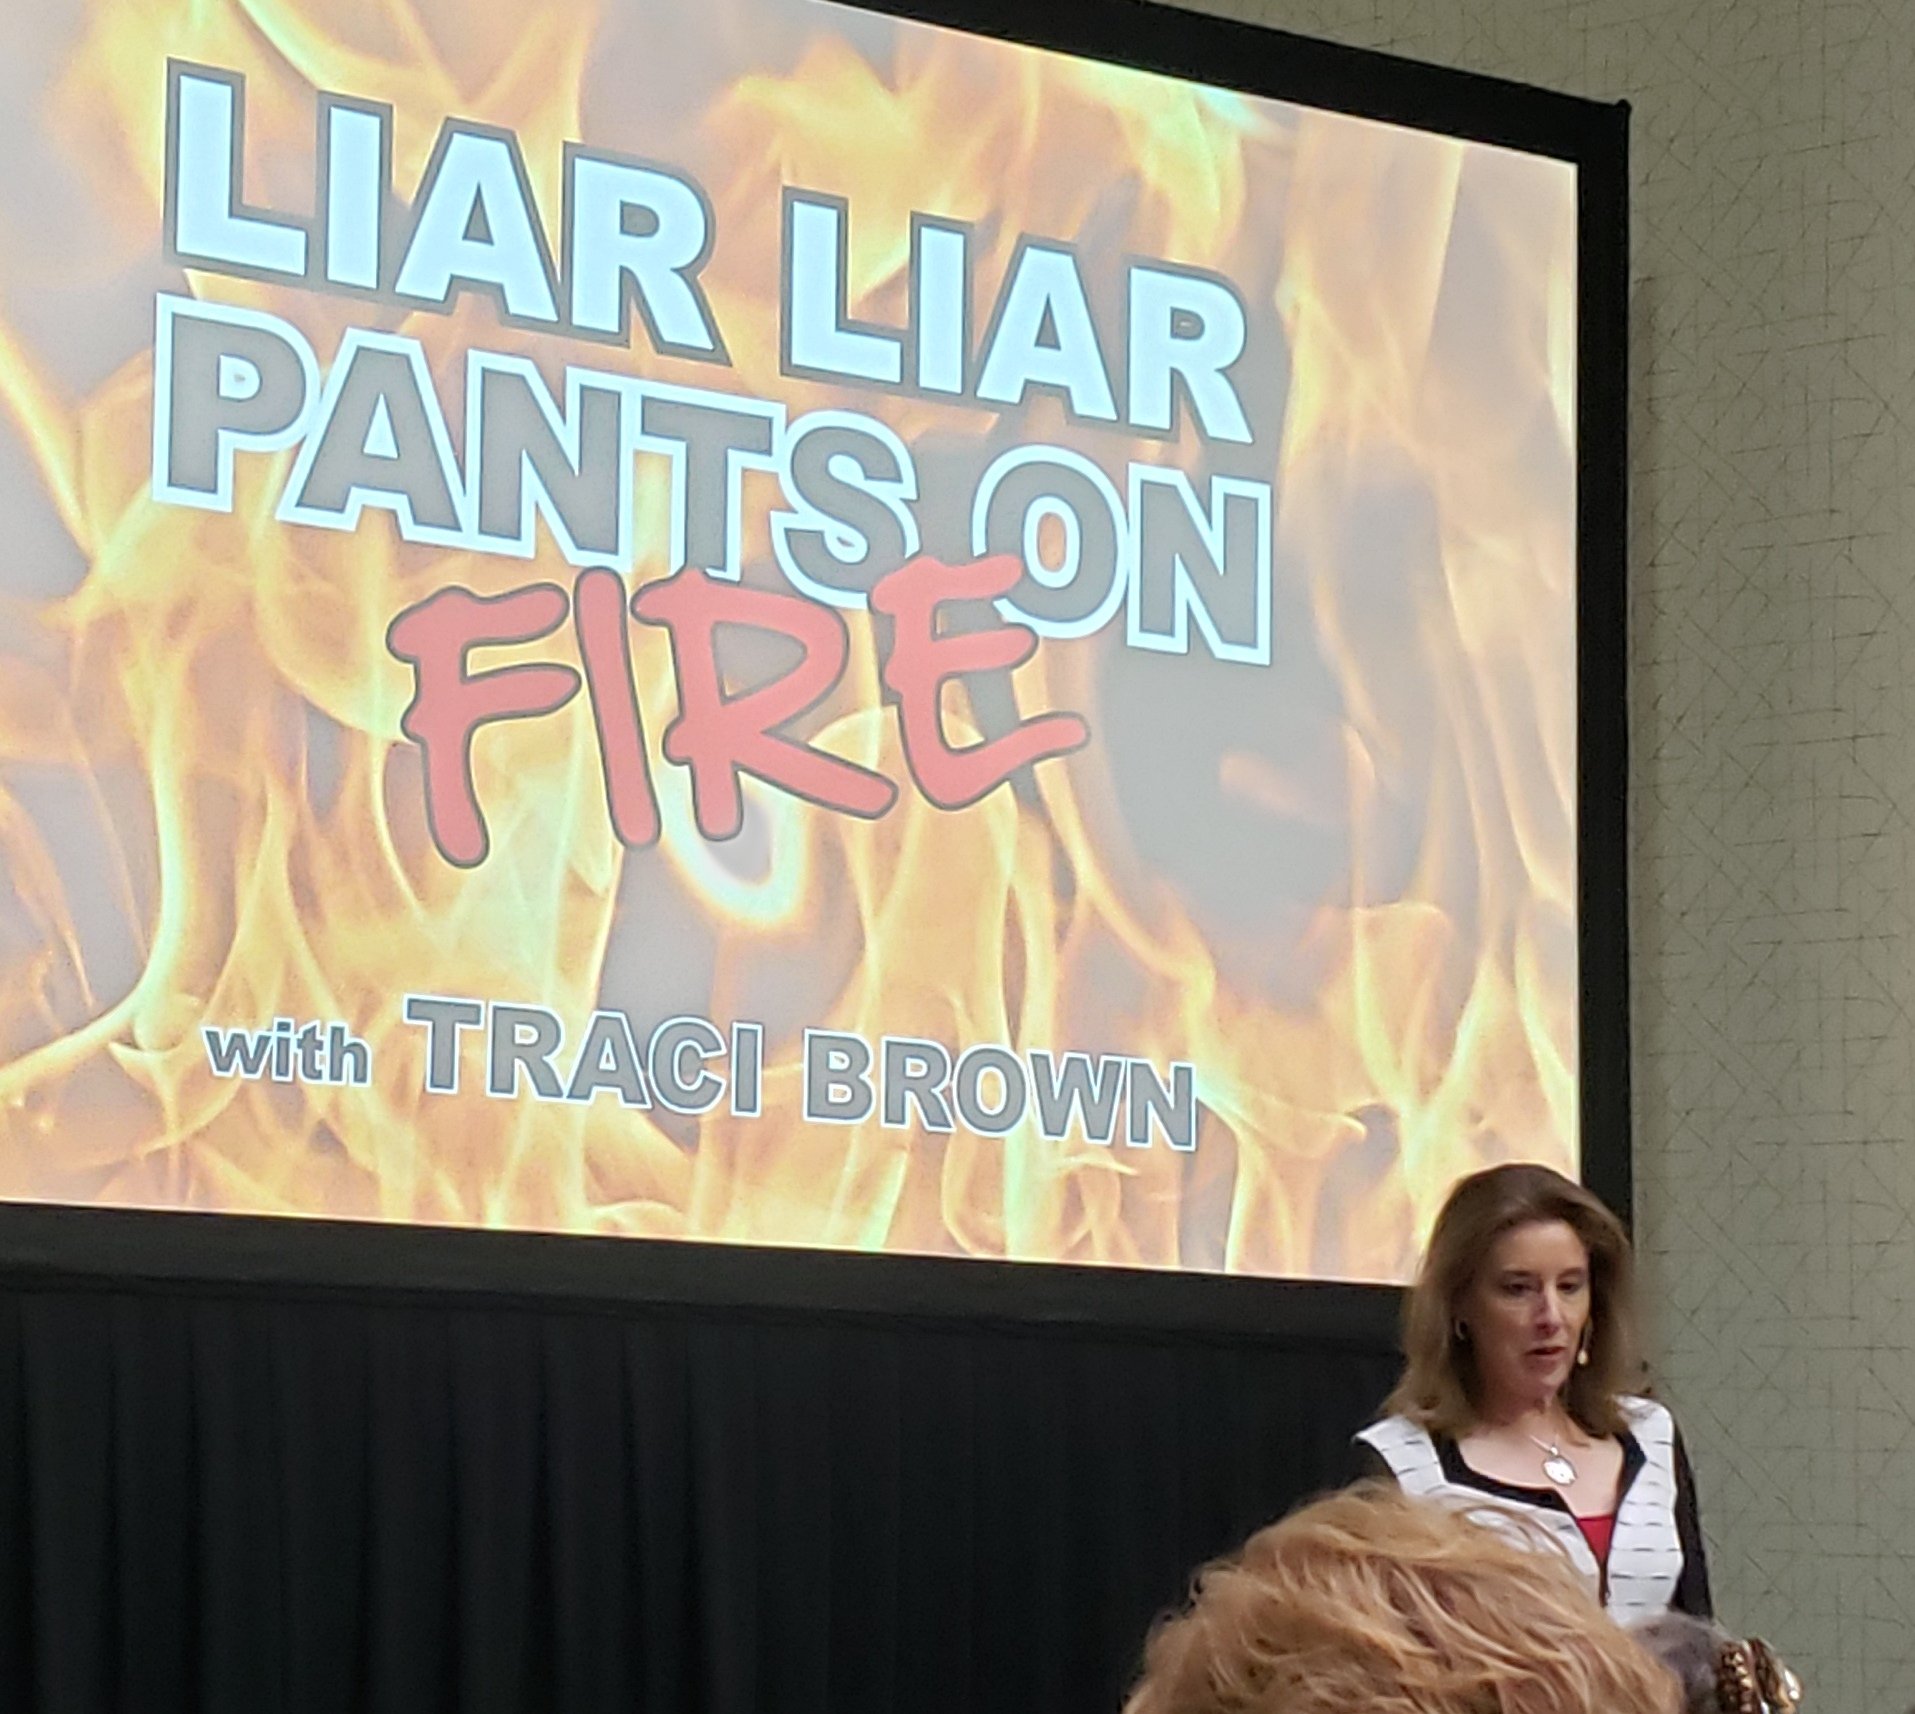 Body language expert Traci Brown spoke at the AHRA 2019 meeting on how to identify when a person is not being honest by their body language. She said medical imaging department administrators can use this knowledge to help in hiring decisions and managing staff. 